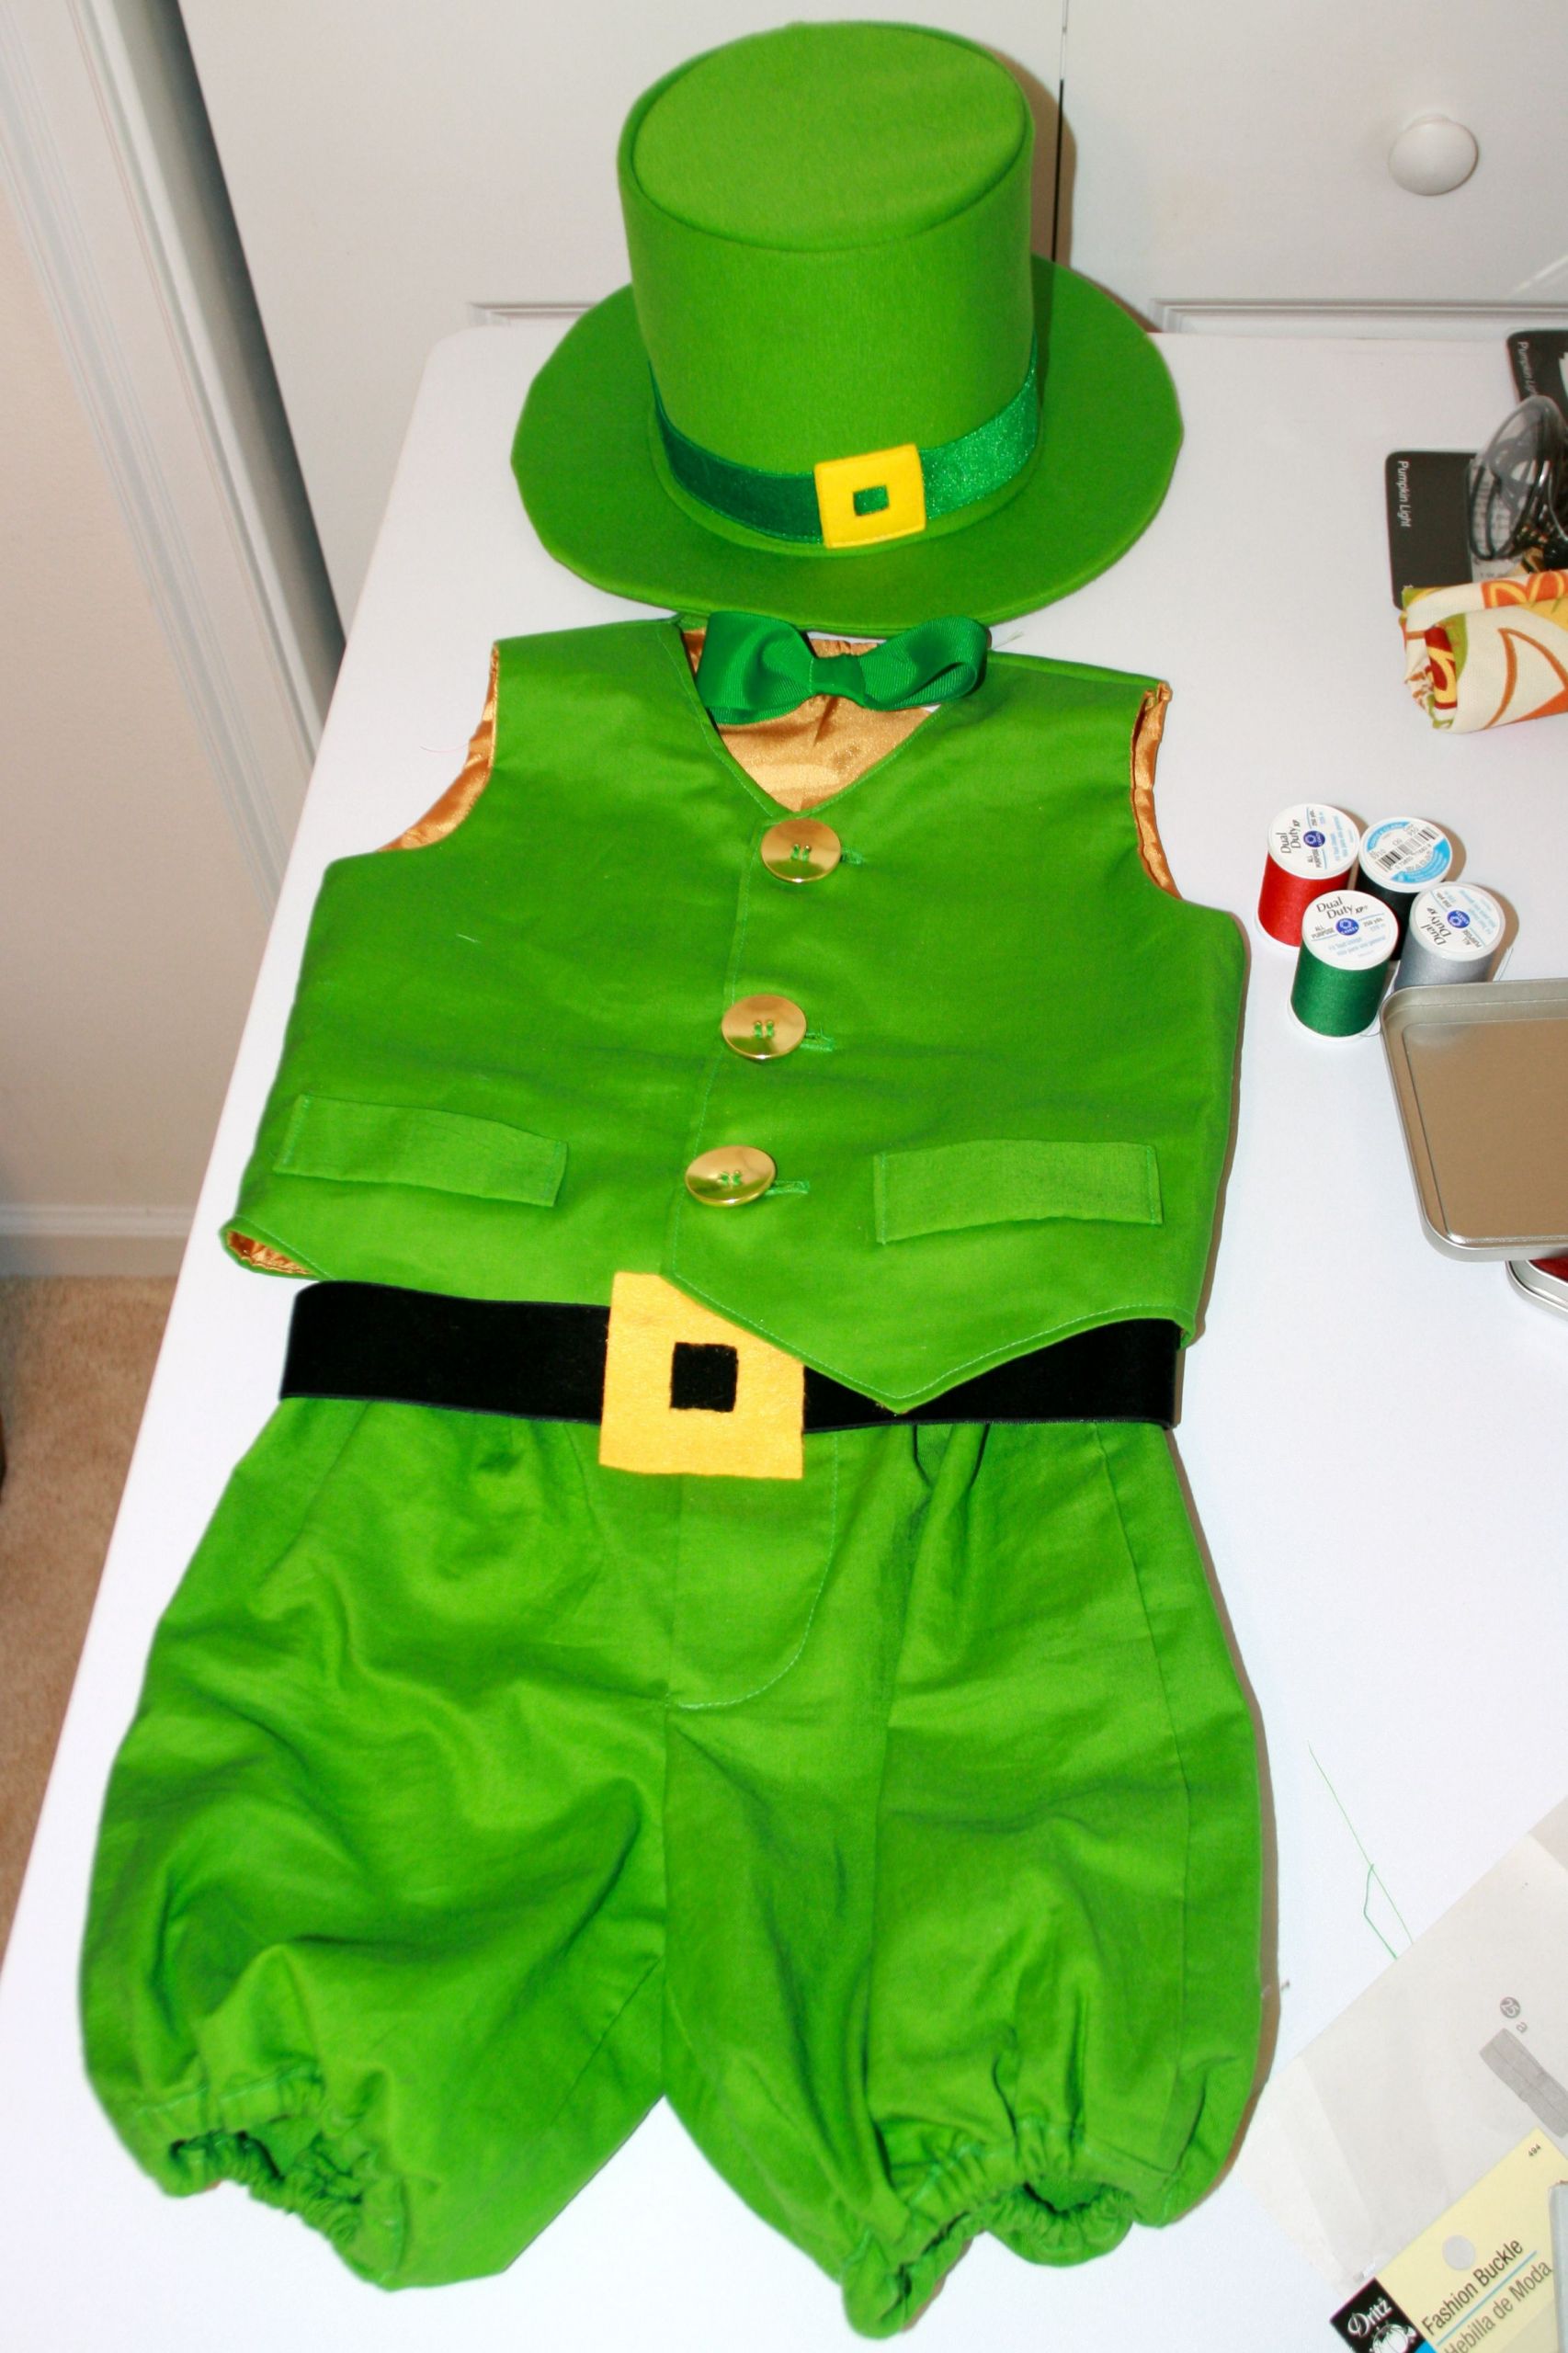 St Patrick's Day Clothes Ideas
 Leprechaun Costume might be able to find a hat for St